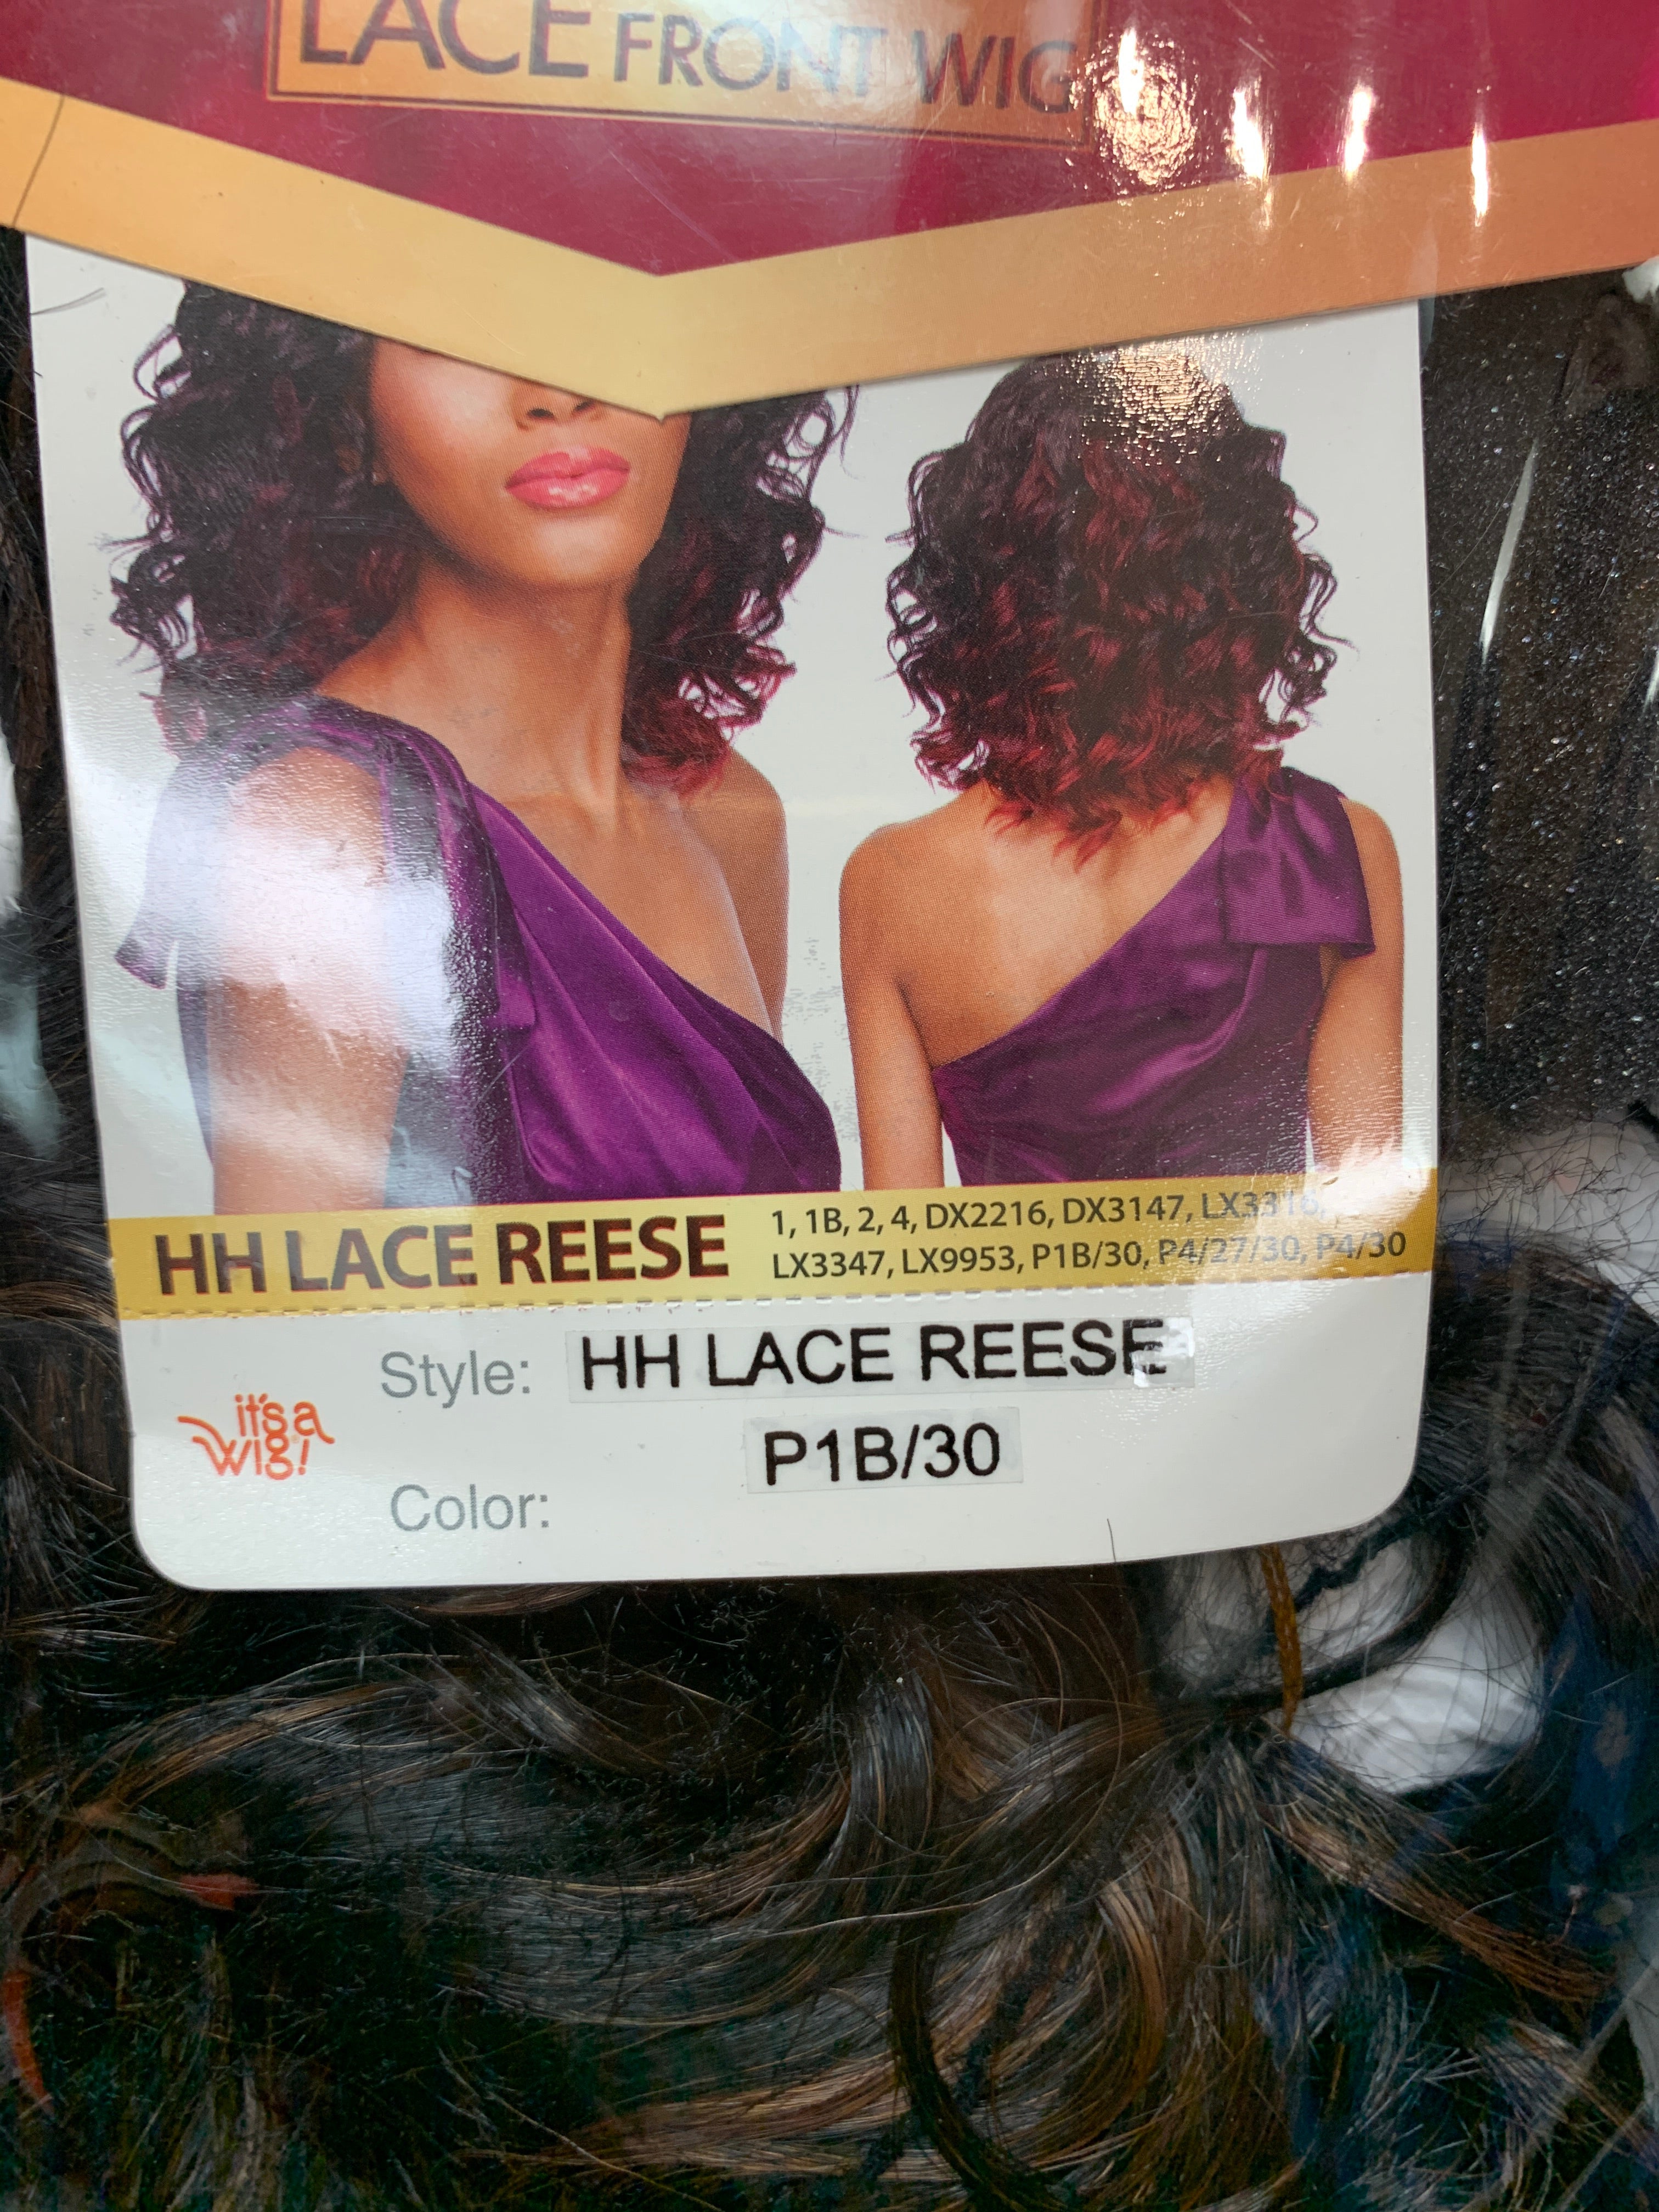 It’s a wig hh lace Reese